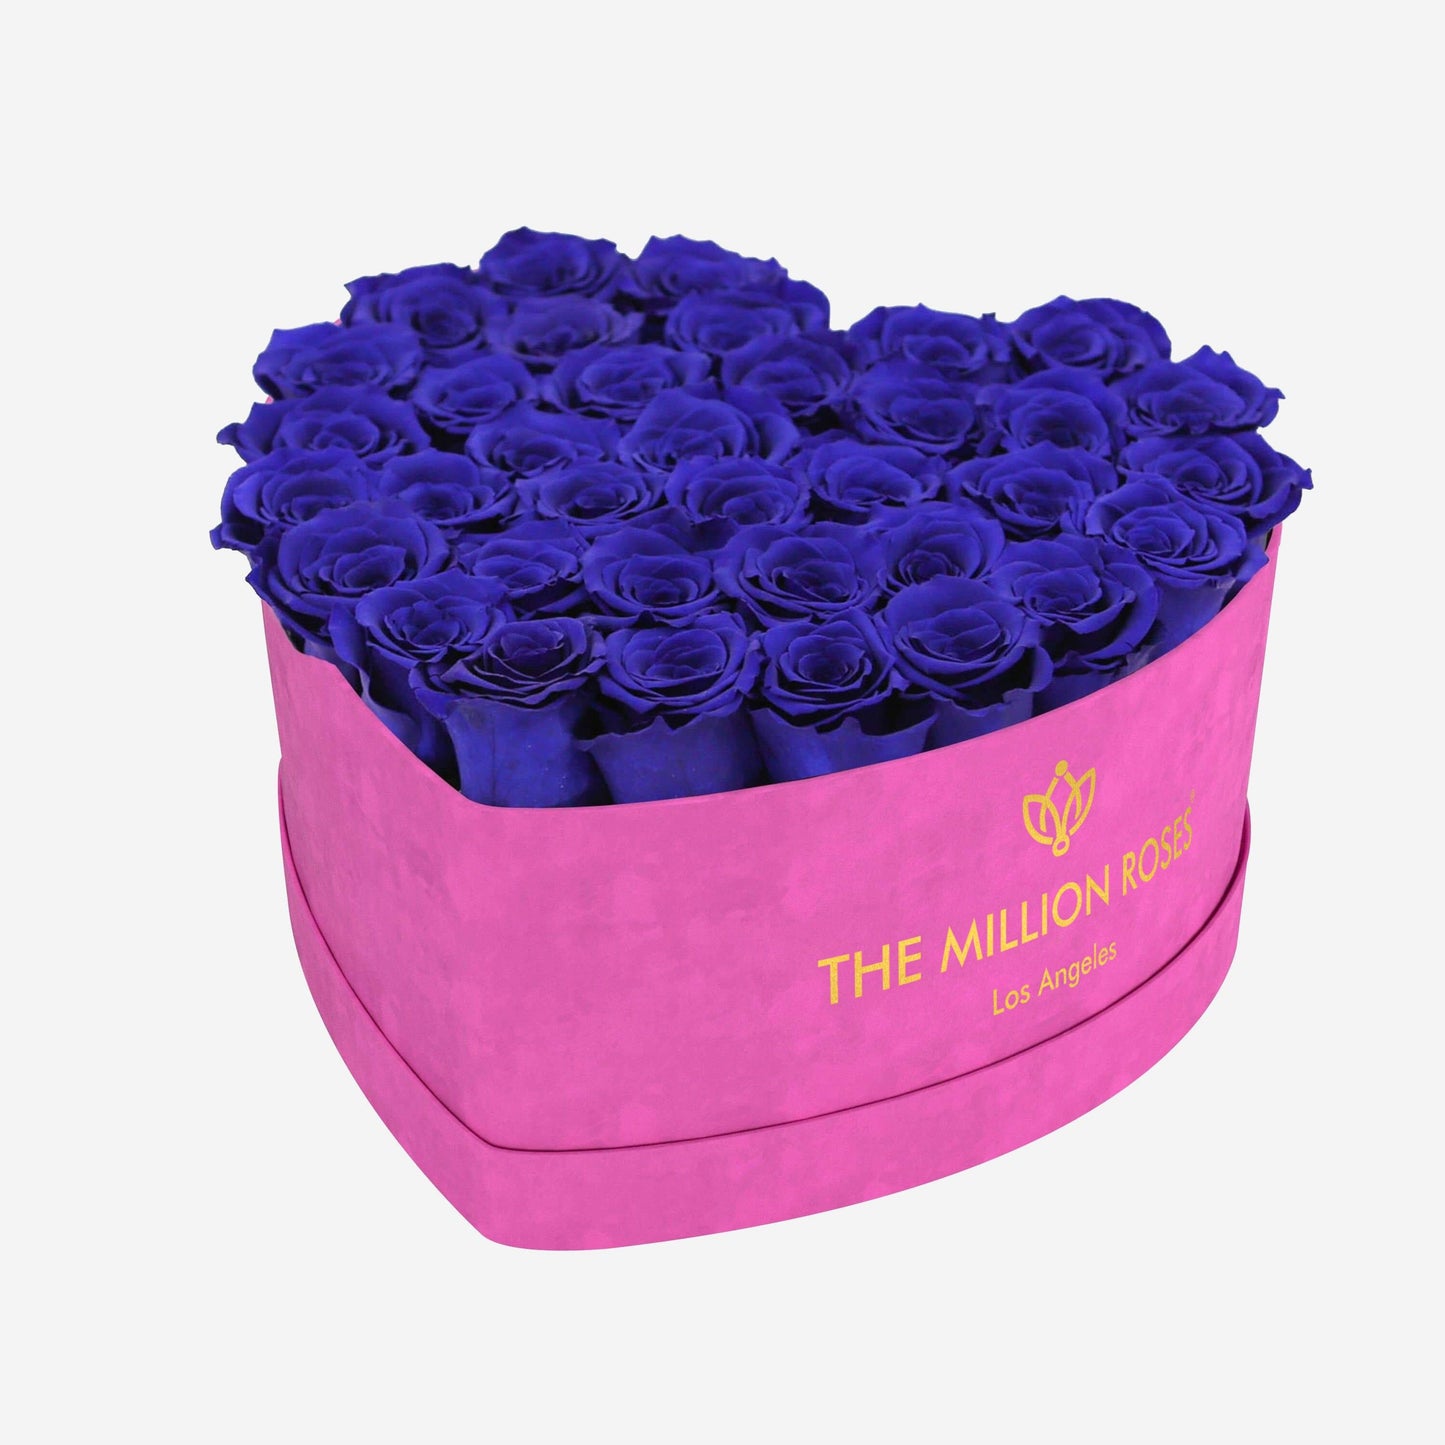 Heart Hot Pink Suede Box | Royal Blue Roses - The Million Roses